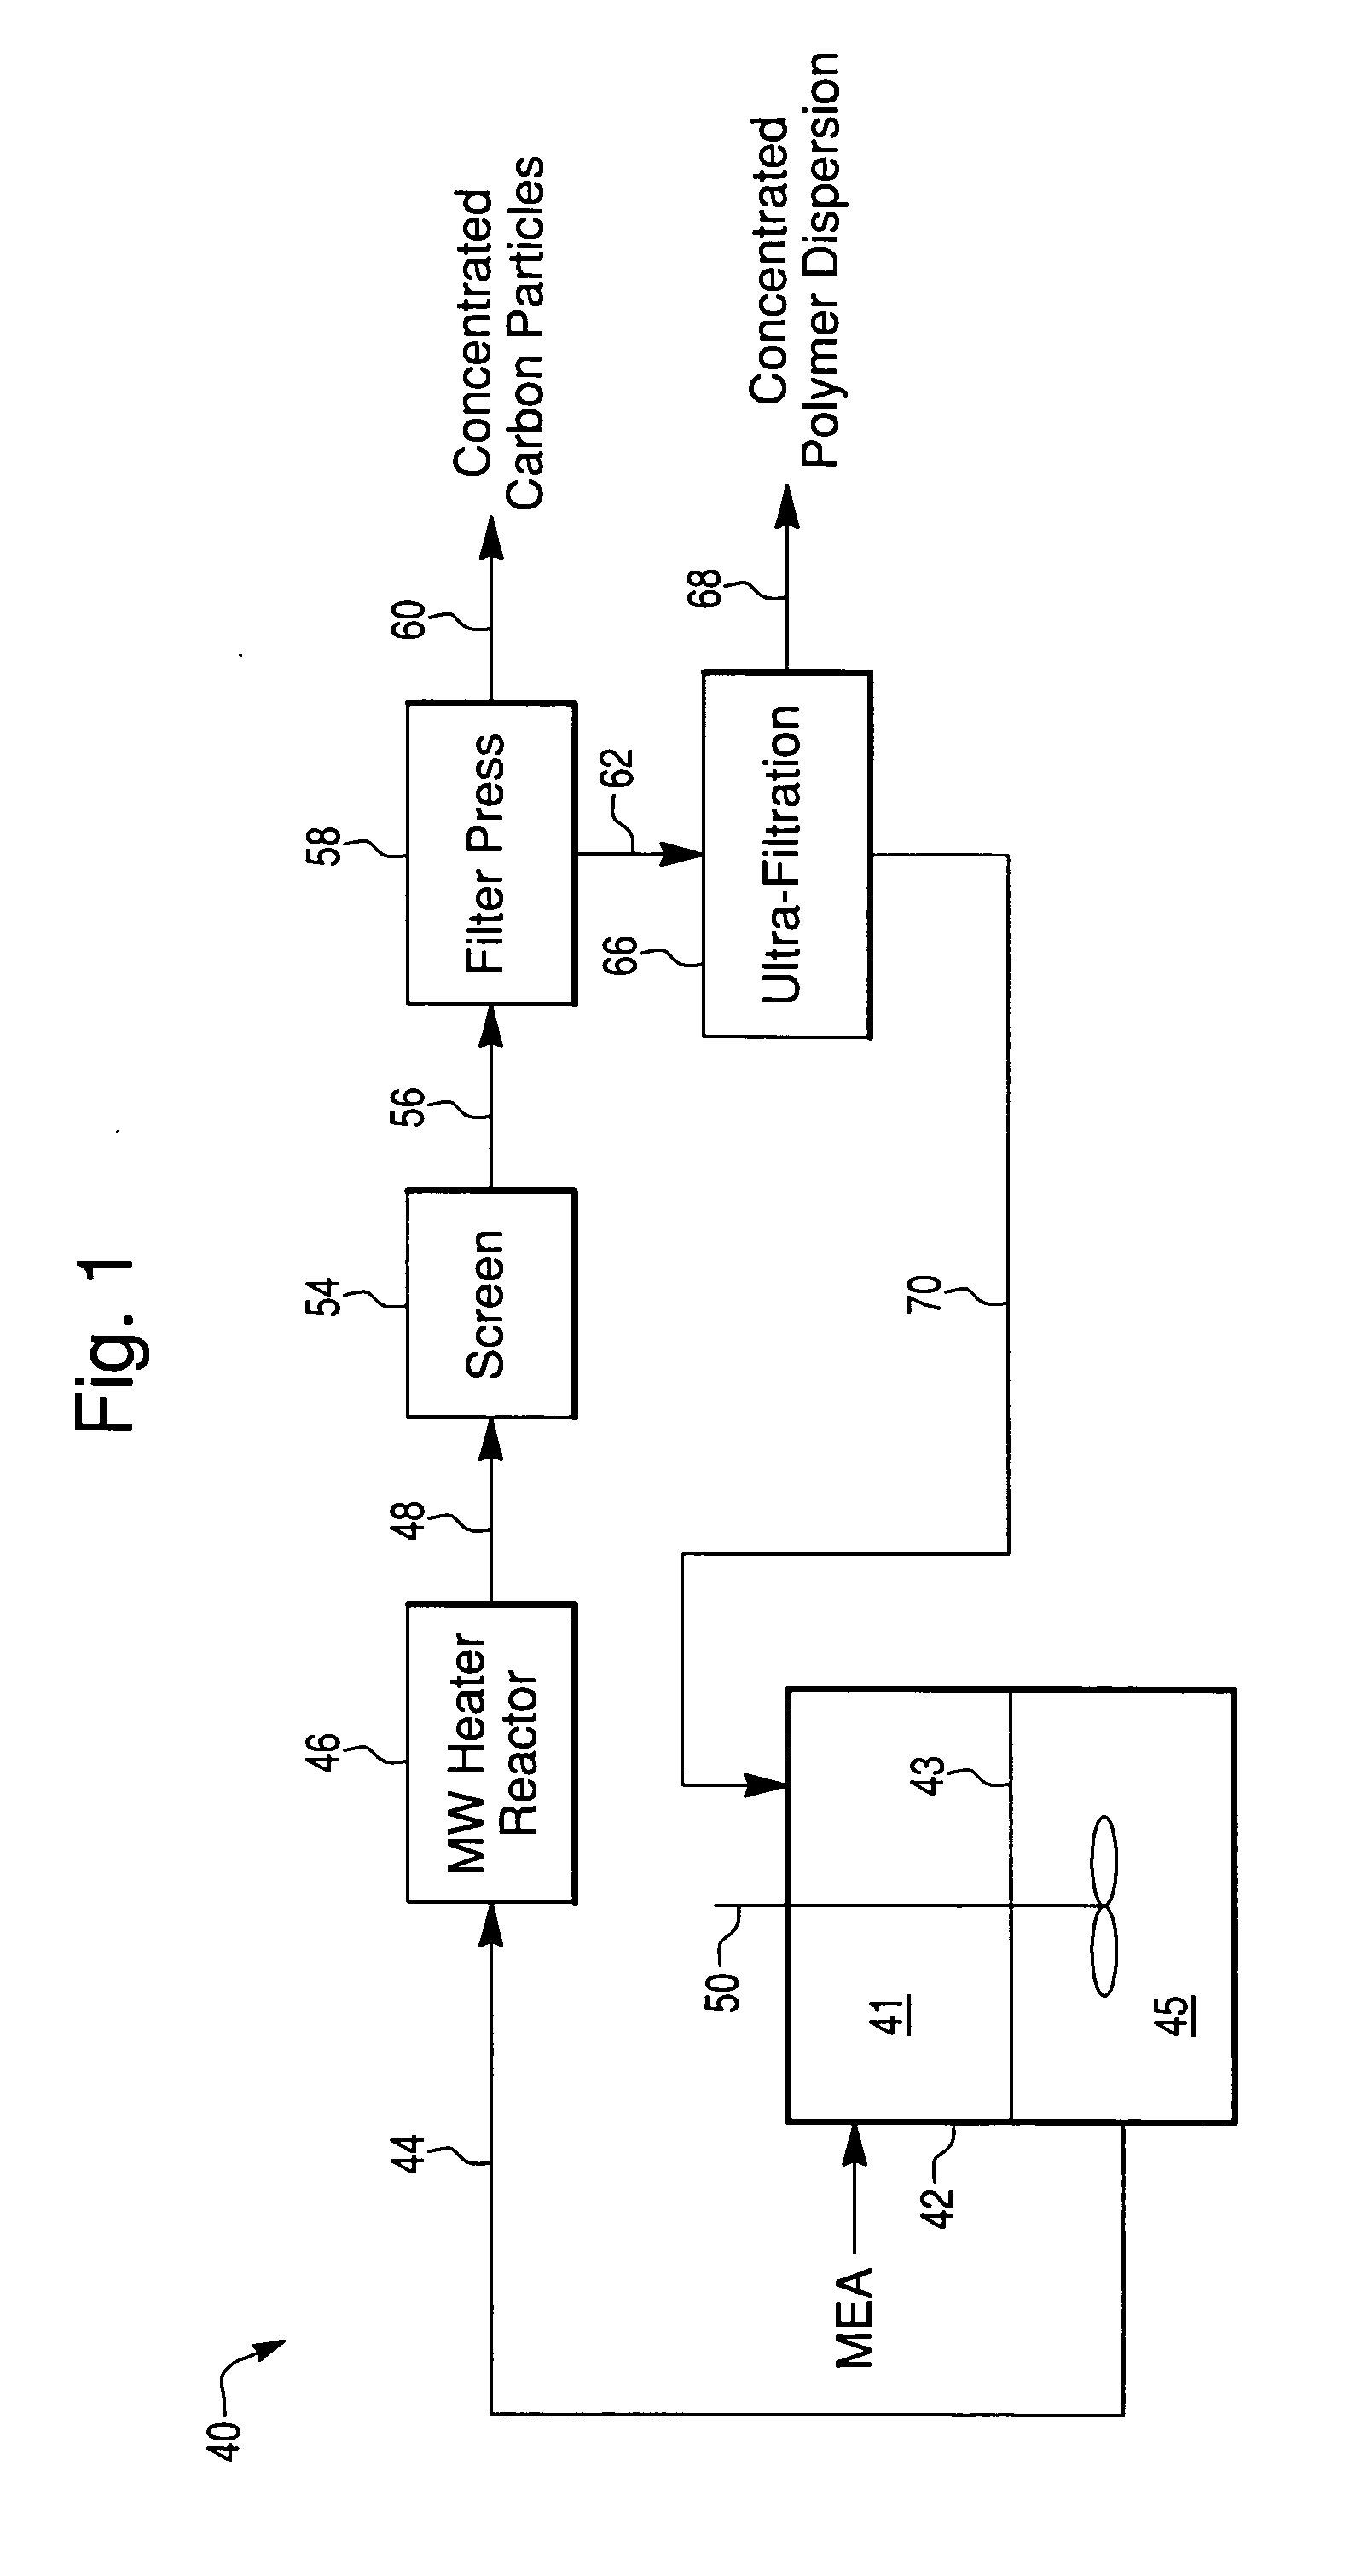 Process for recycling components of a PEM fuel cell membrane electrode assembly